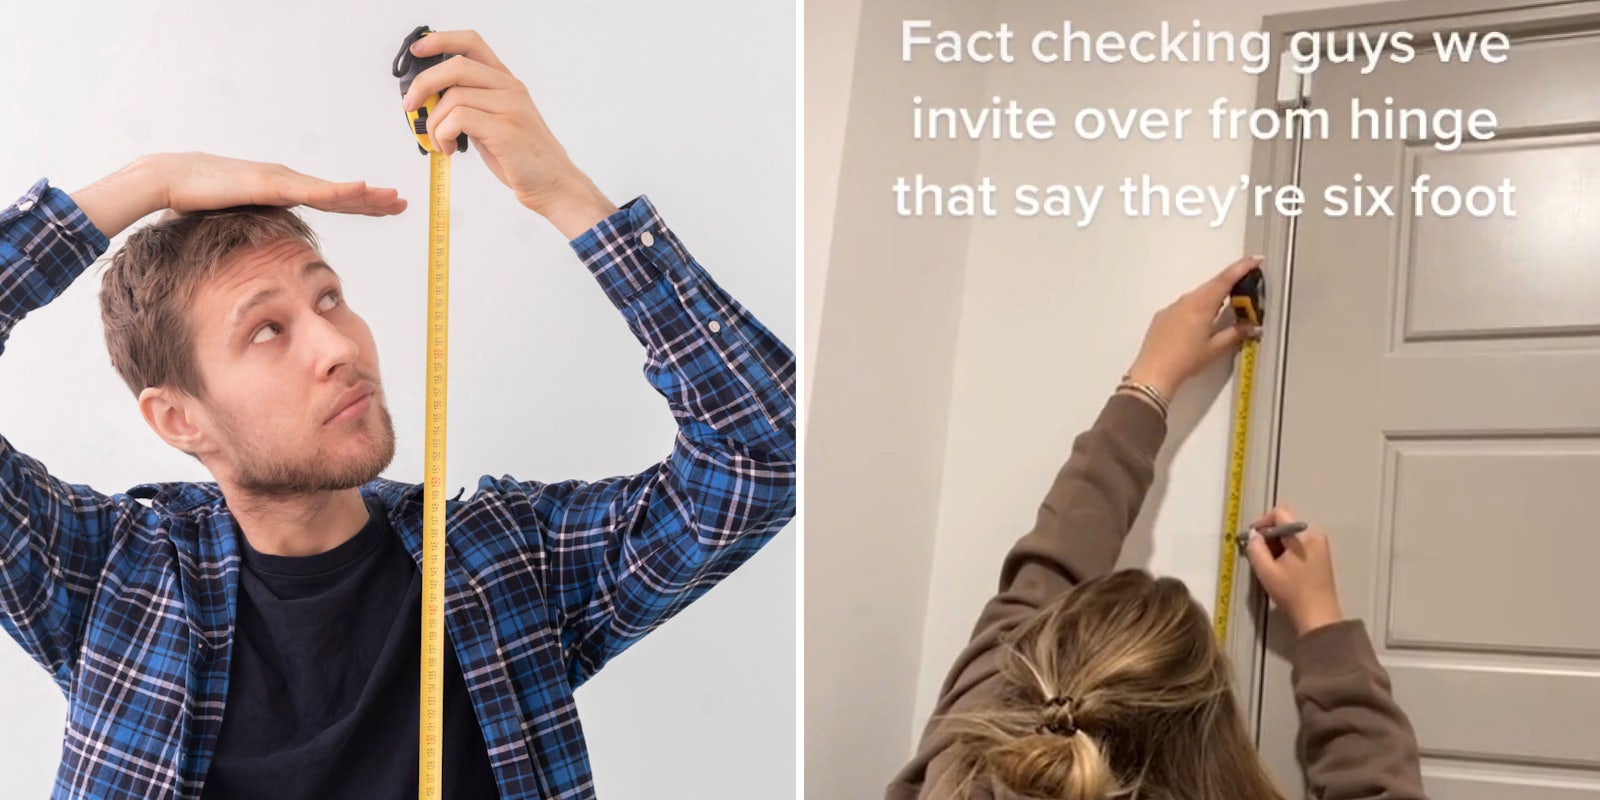 Man holding measuring tape hand on head measuring height (l) Woman holding measuring tape to the wall caption 'Fact checking guys we invite over from hinge that say they're six foot' (r)